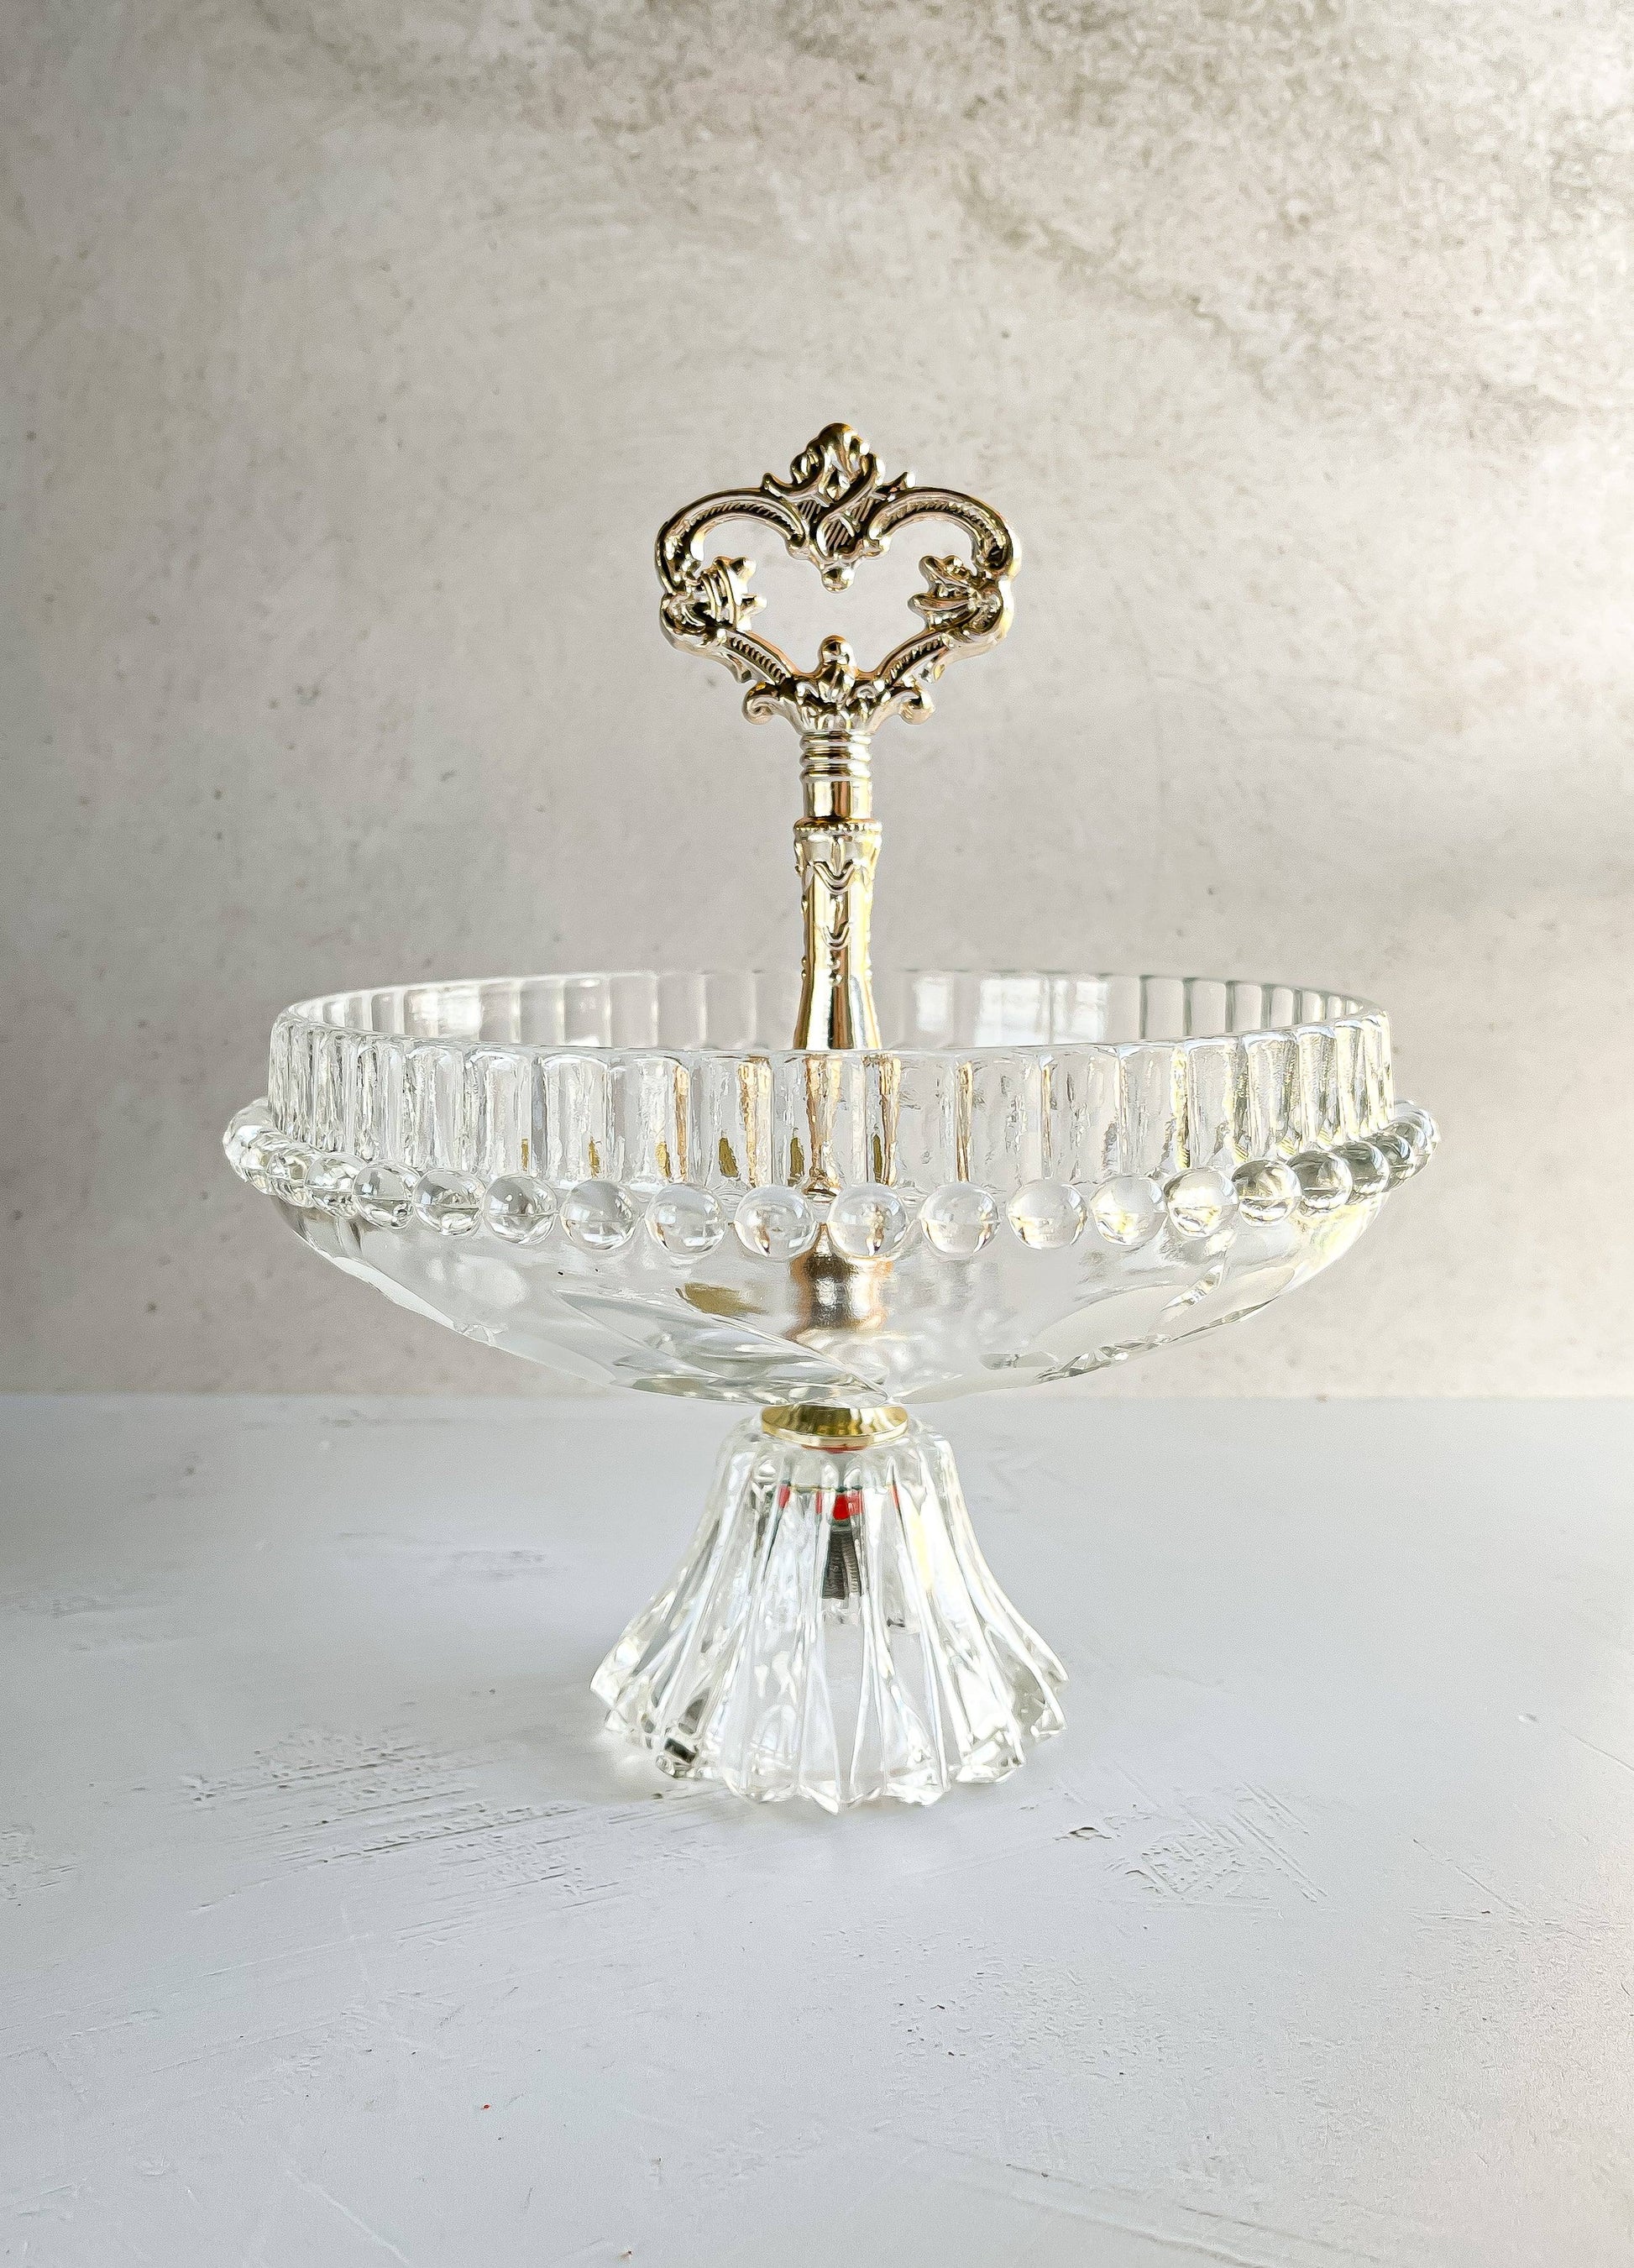 Hand-Cut Glass Centrepiece with Plastic Golden Accents - Made in Italy - SOSC Home